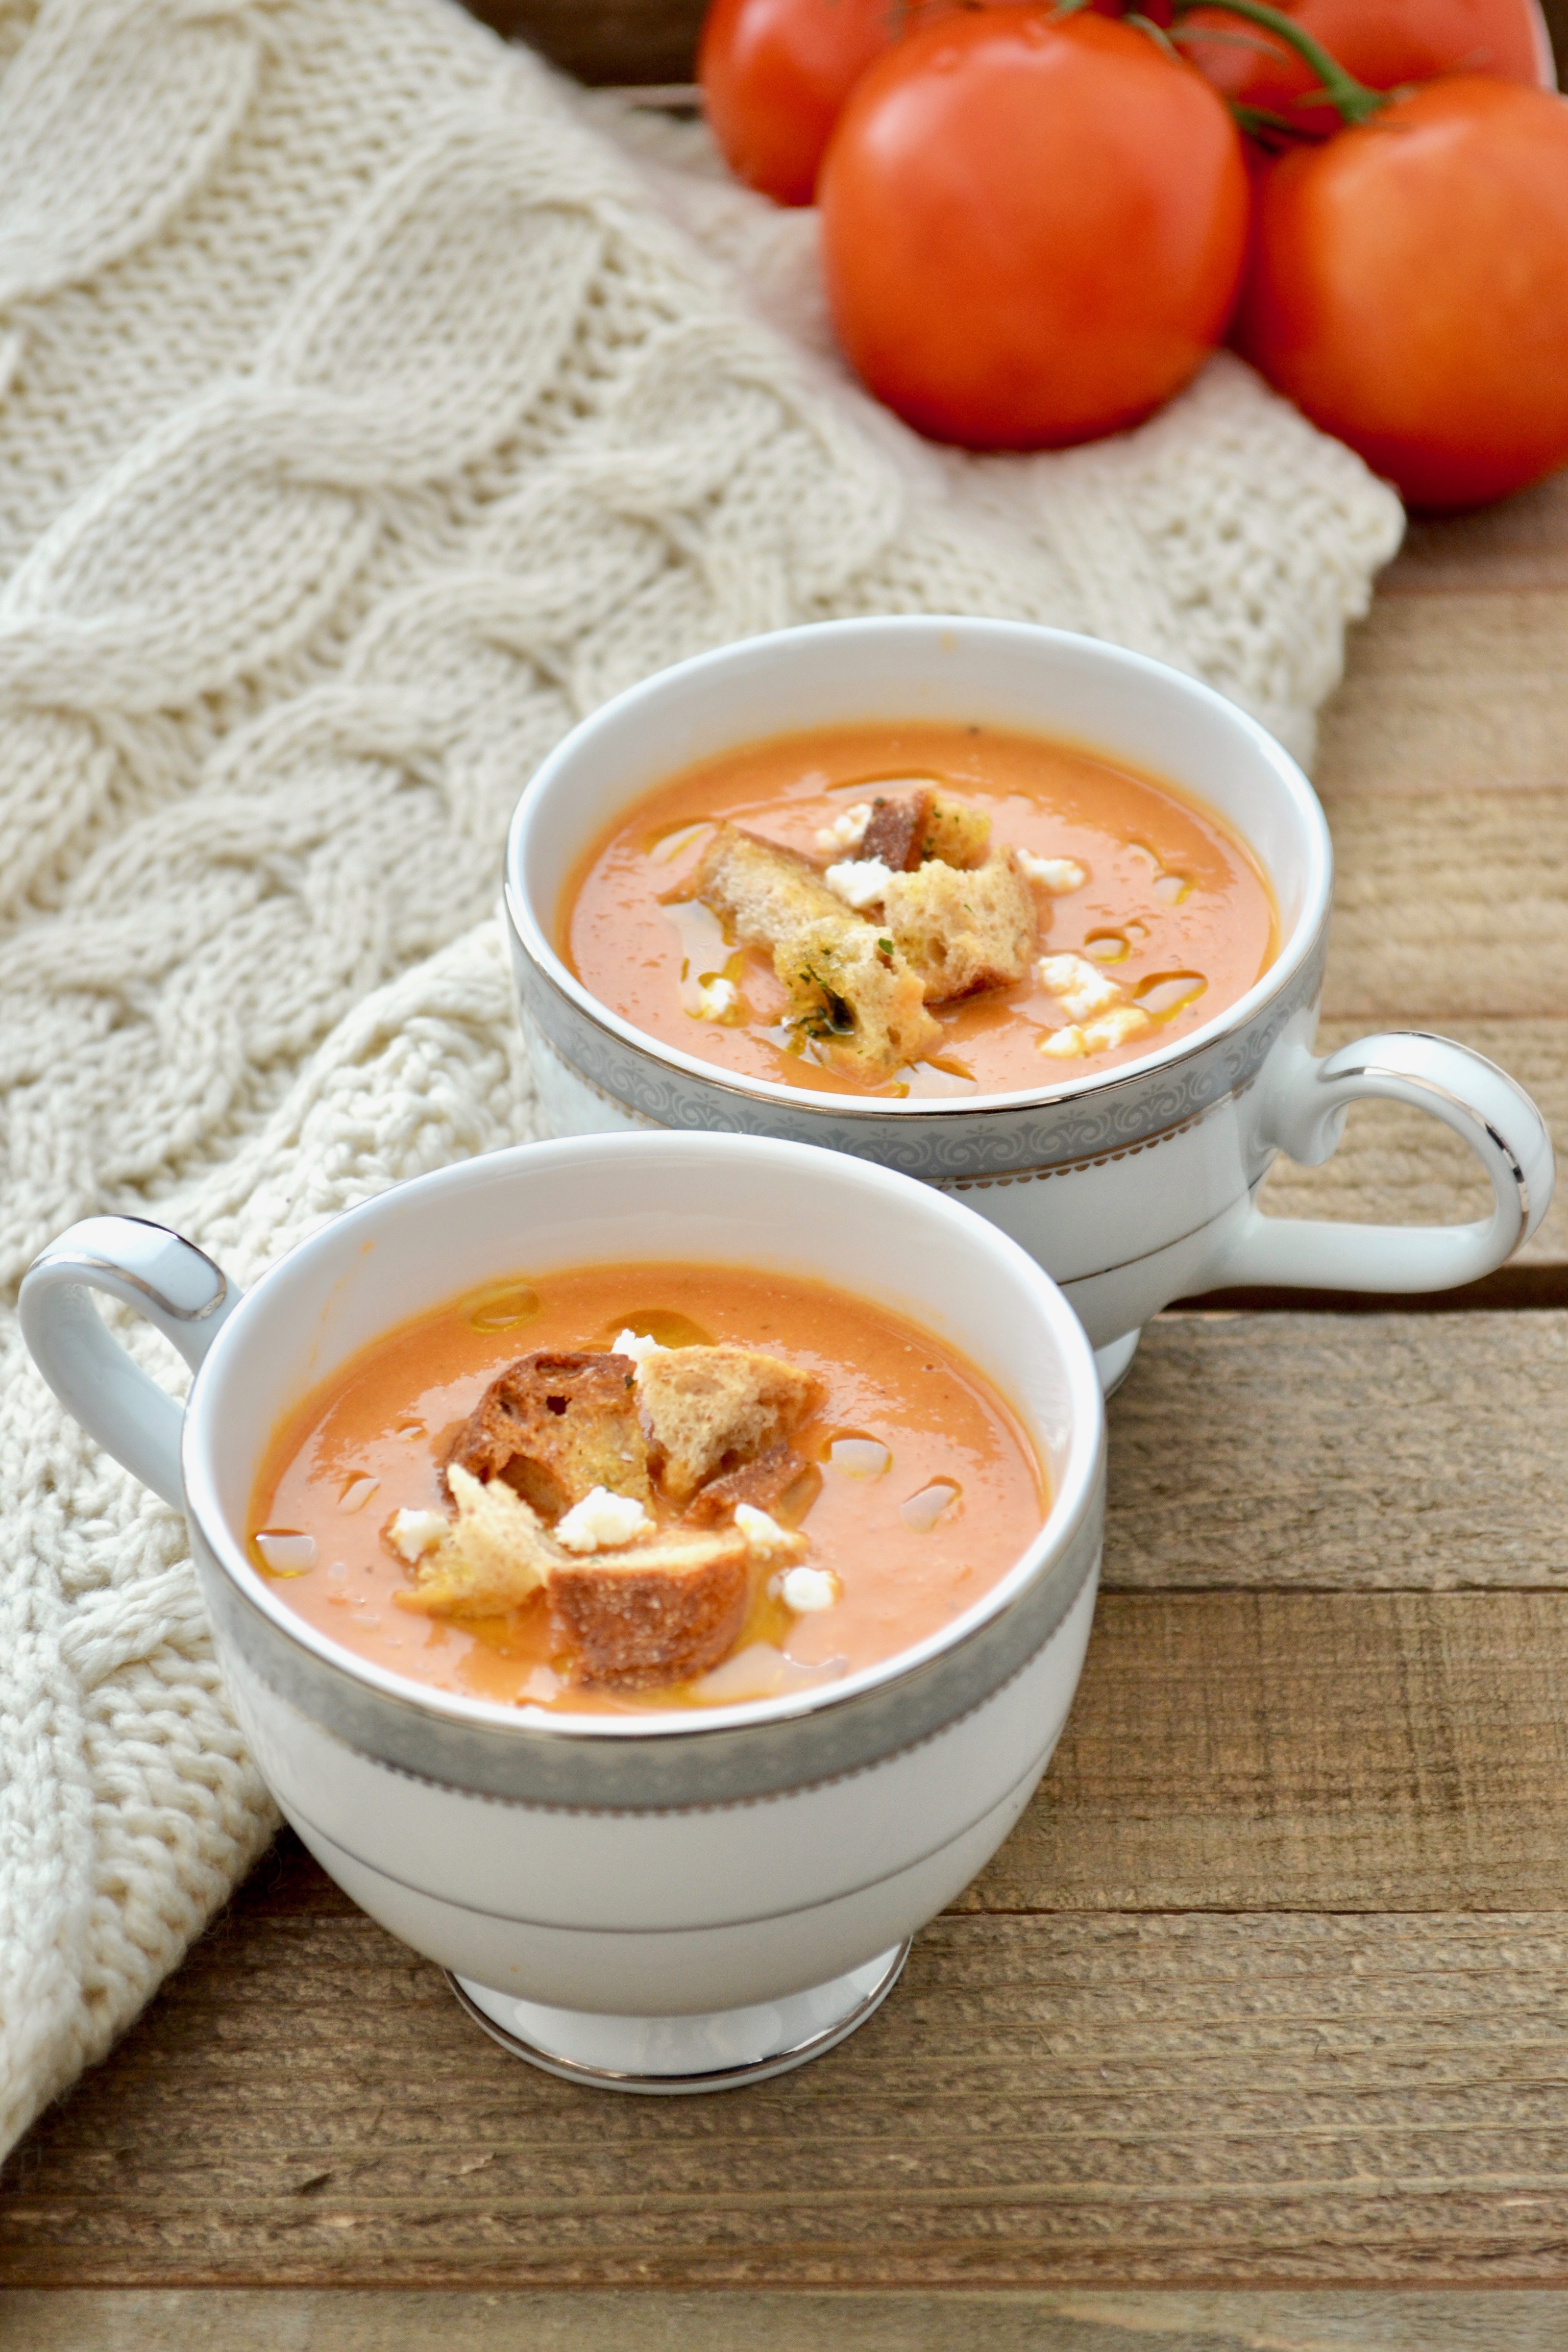 Roasted Tomato and Goat Cheese Soup - Measuring Cups, Optional